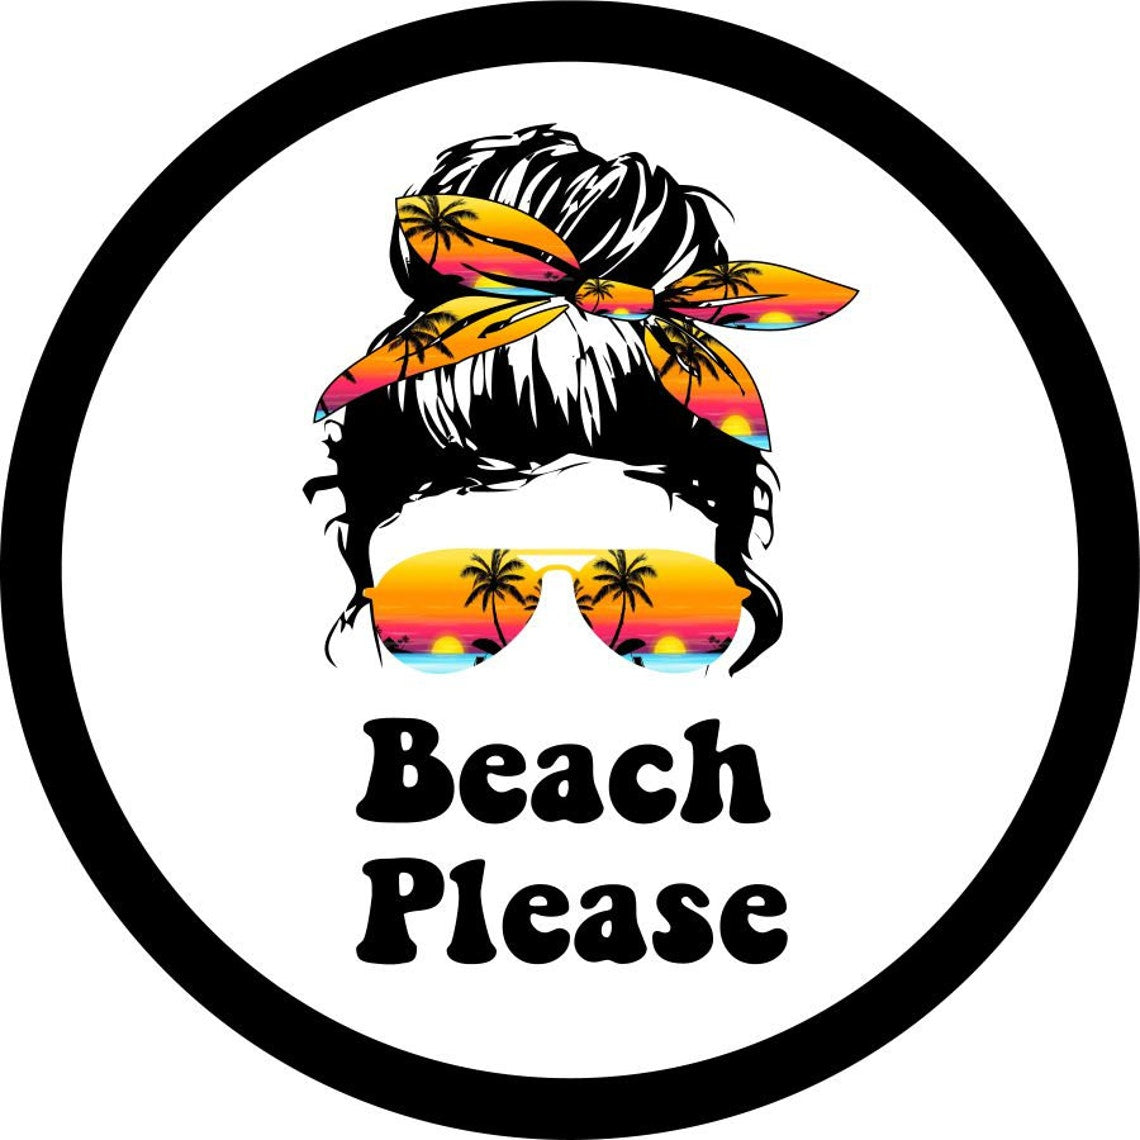 Messy Bun Beach Please - Girl with Sunglasses Tropical Spare Tire Cover